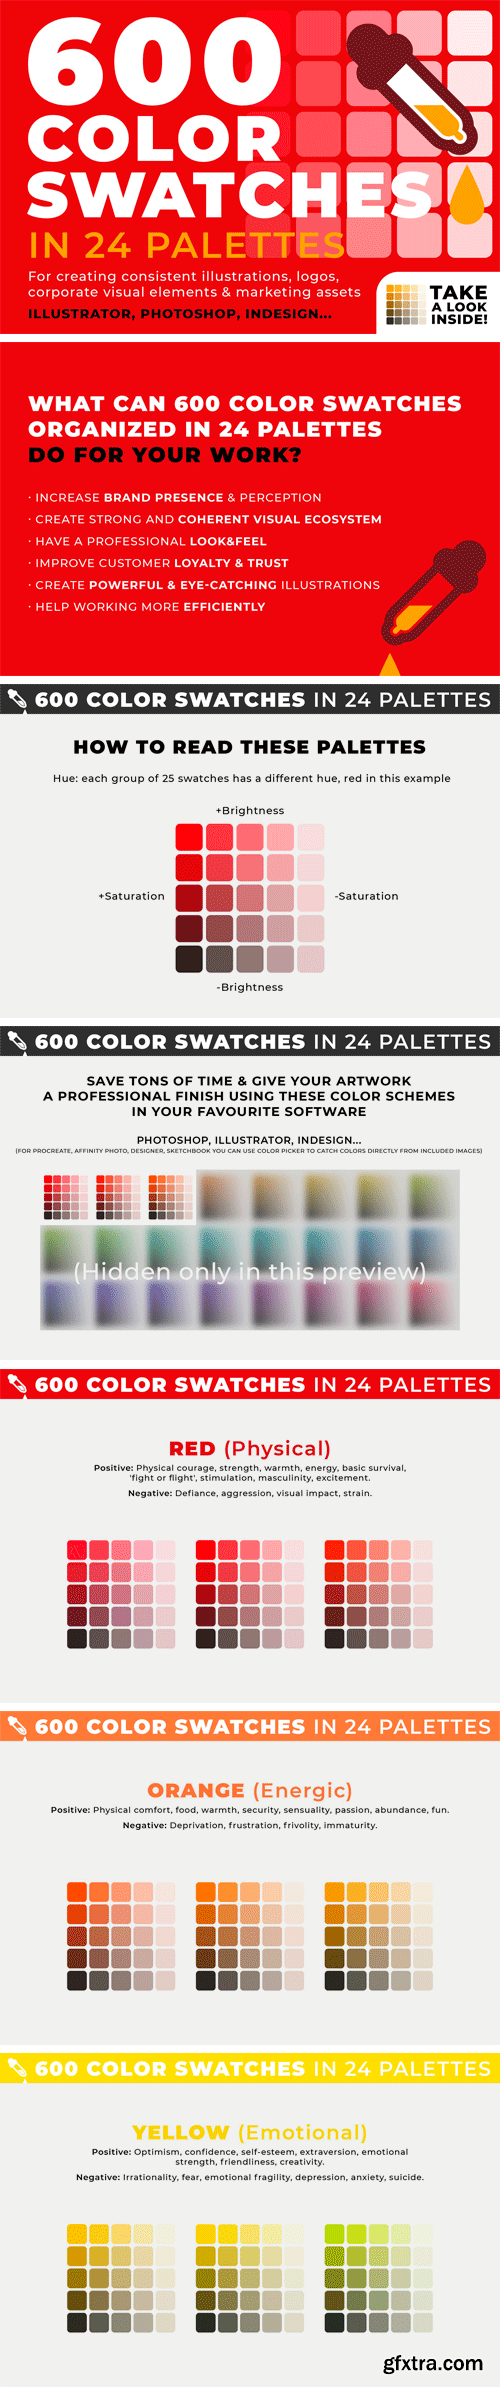 CM - 600 Color Swatches in 24 Palettes